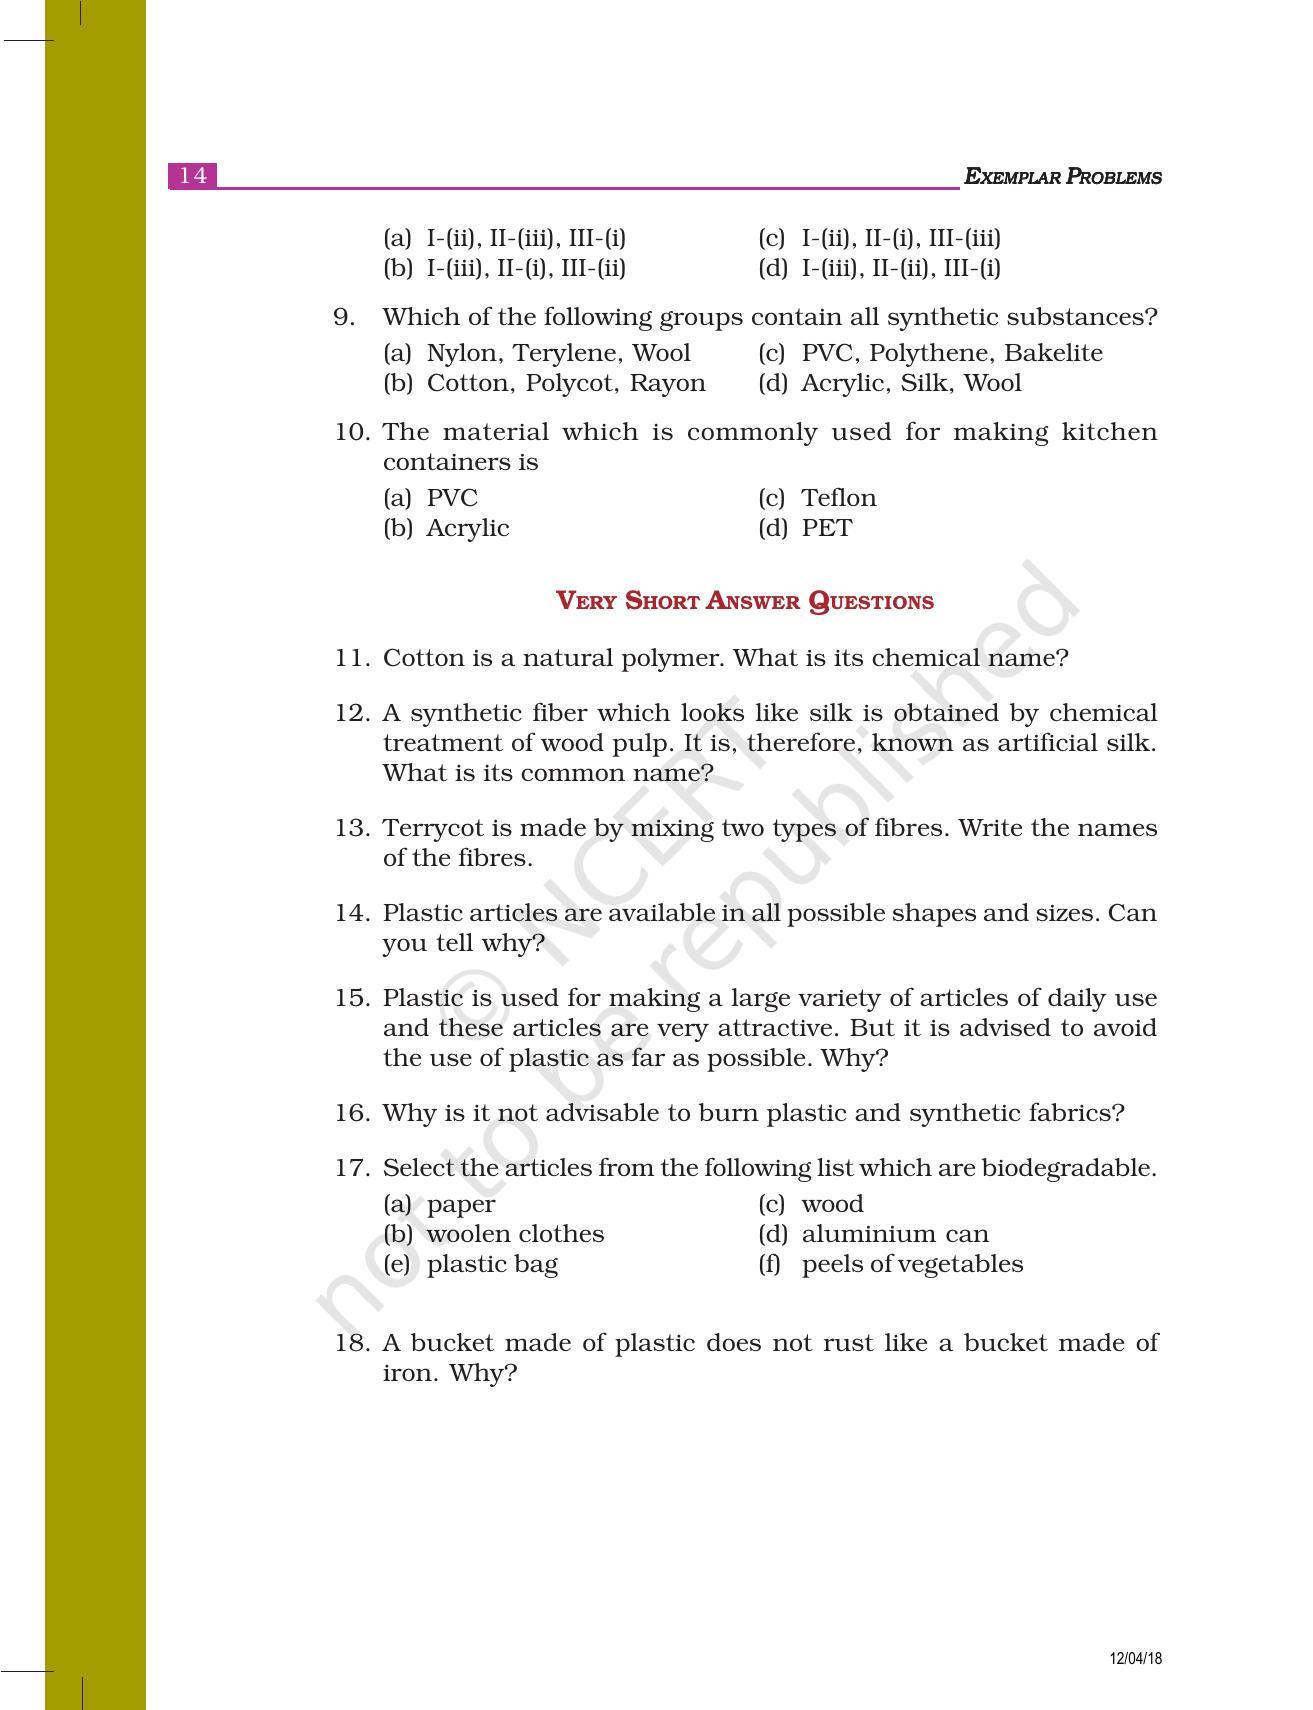 NCERT Exemplar Book for Class 8 Science: Chapter 3- Synthetic Fibres and Plastics - Page 2